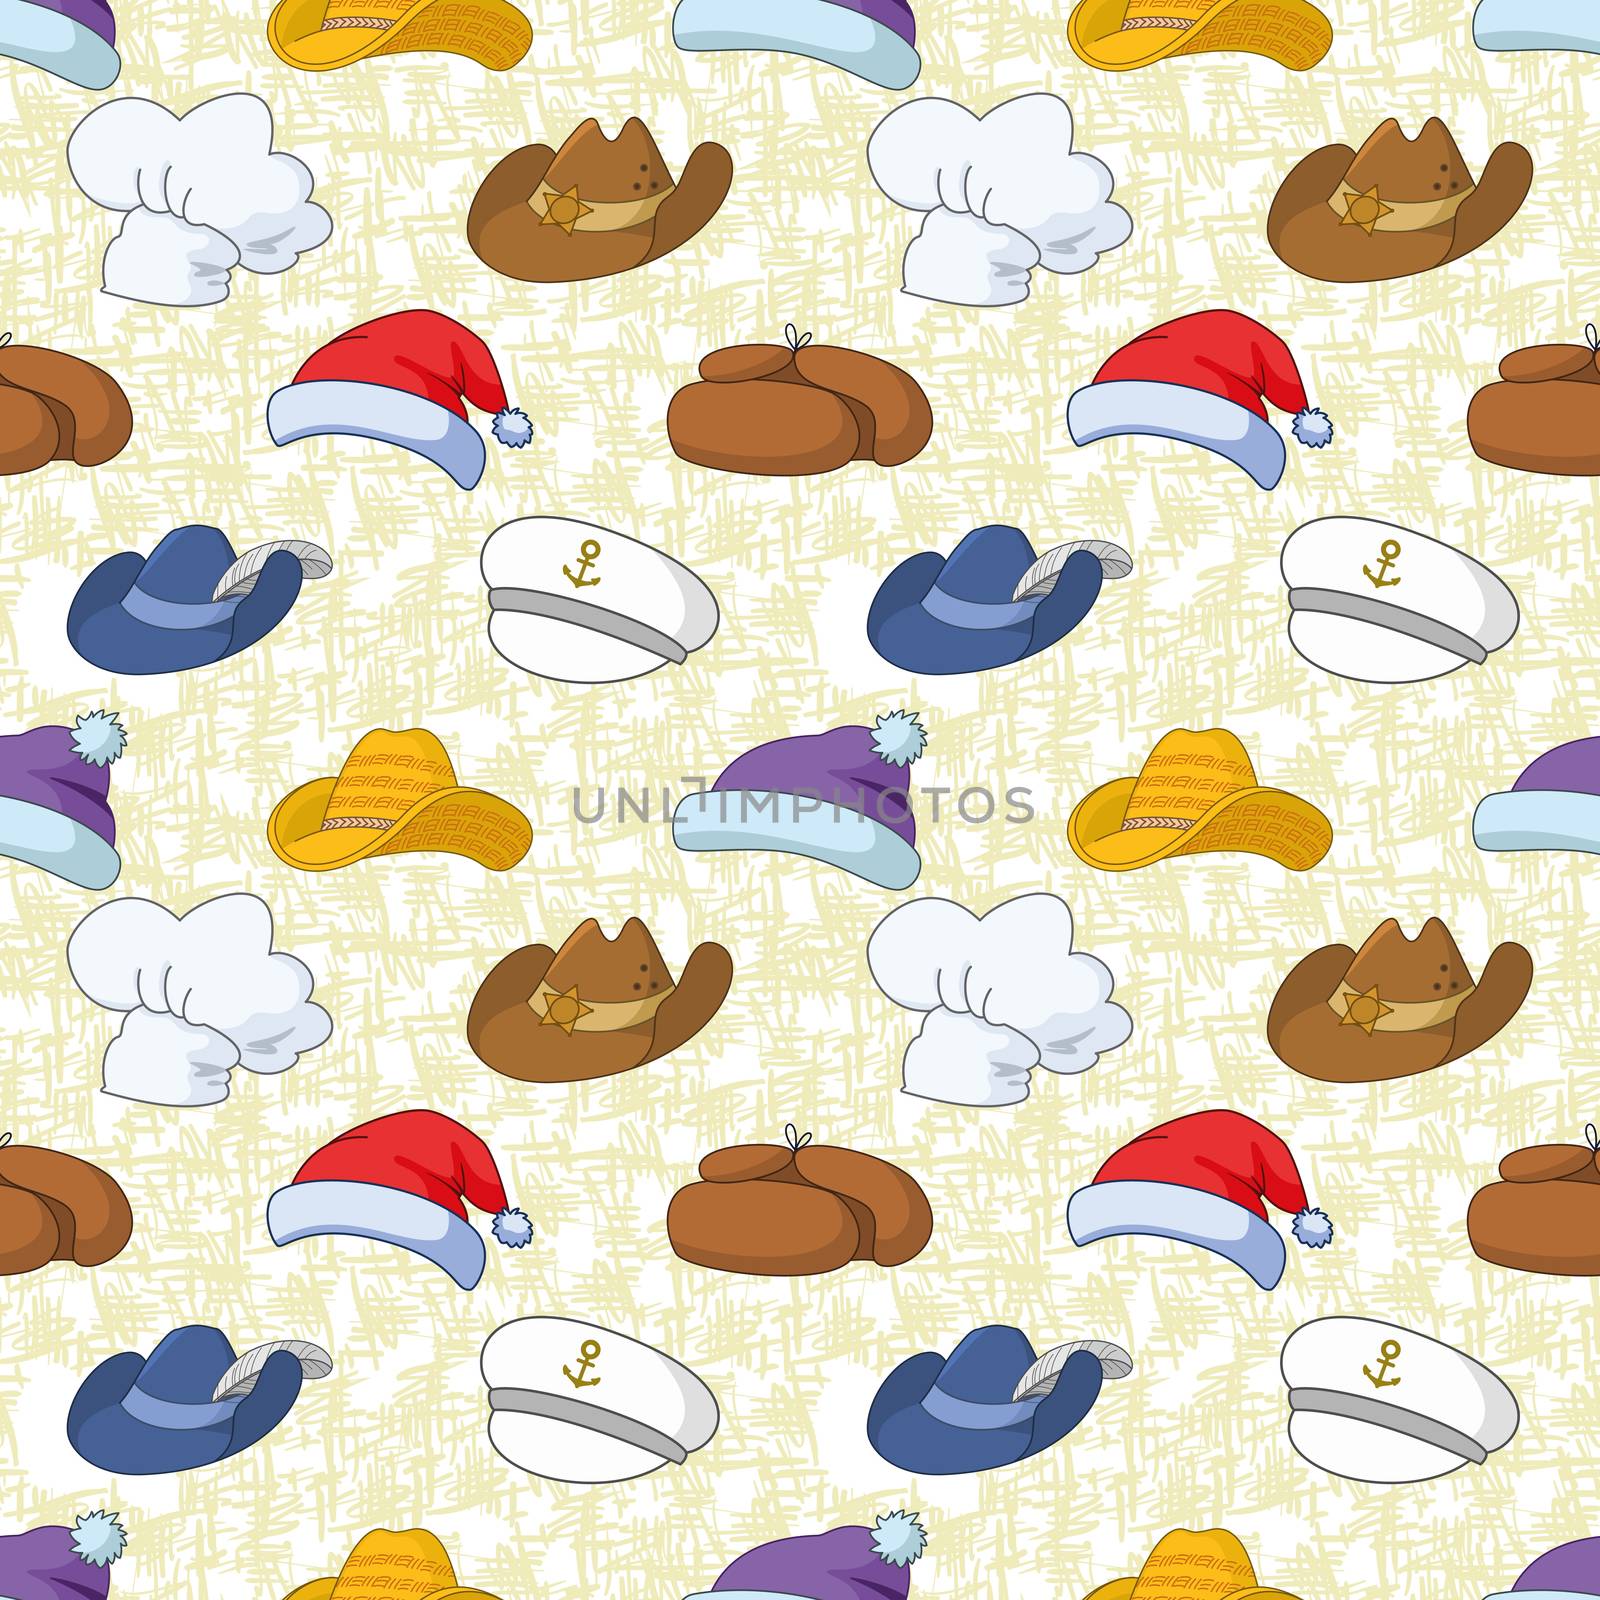 Seamless pattern of different heads designs on abstract background, Santa Claus, sheriff, musketeer, captain, cook and others.